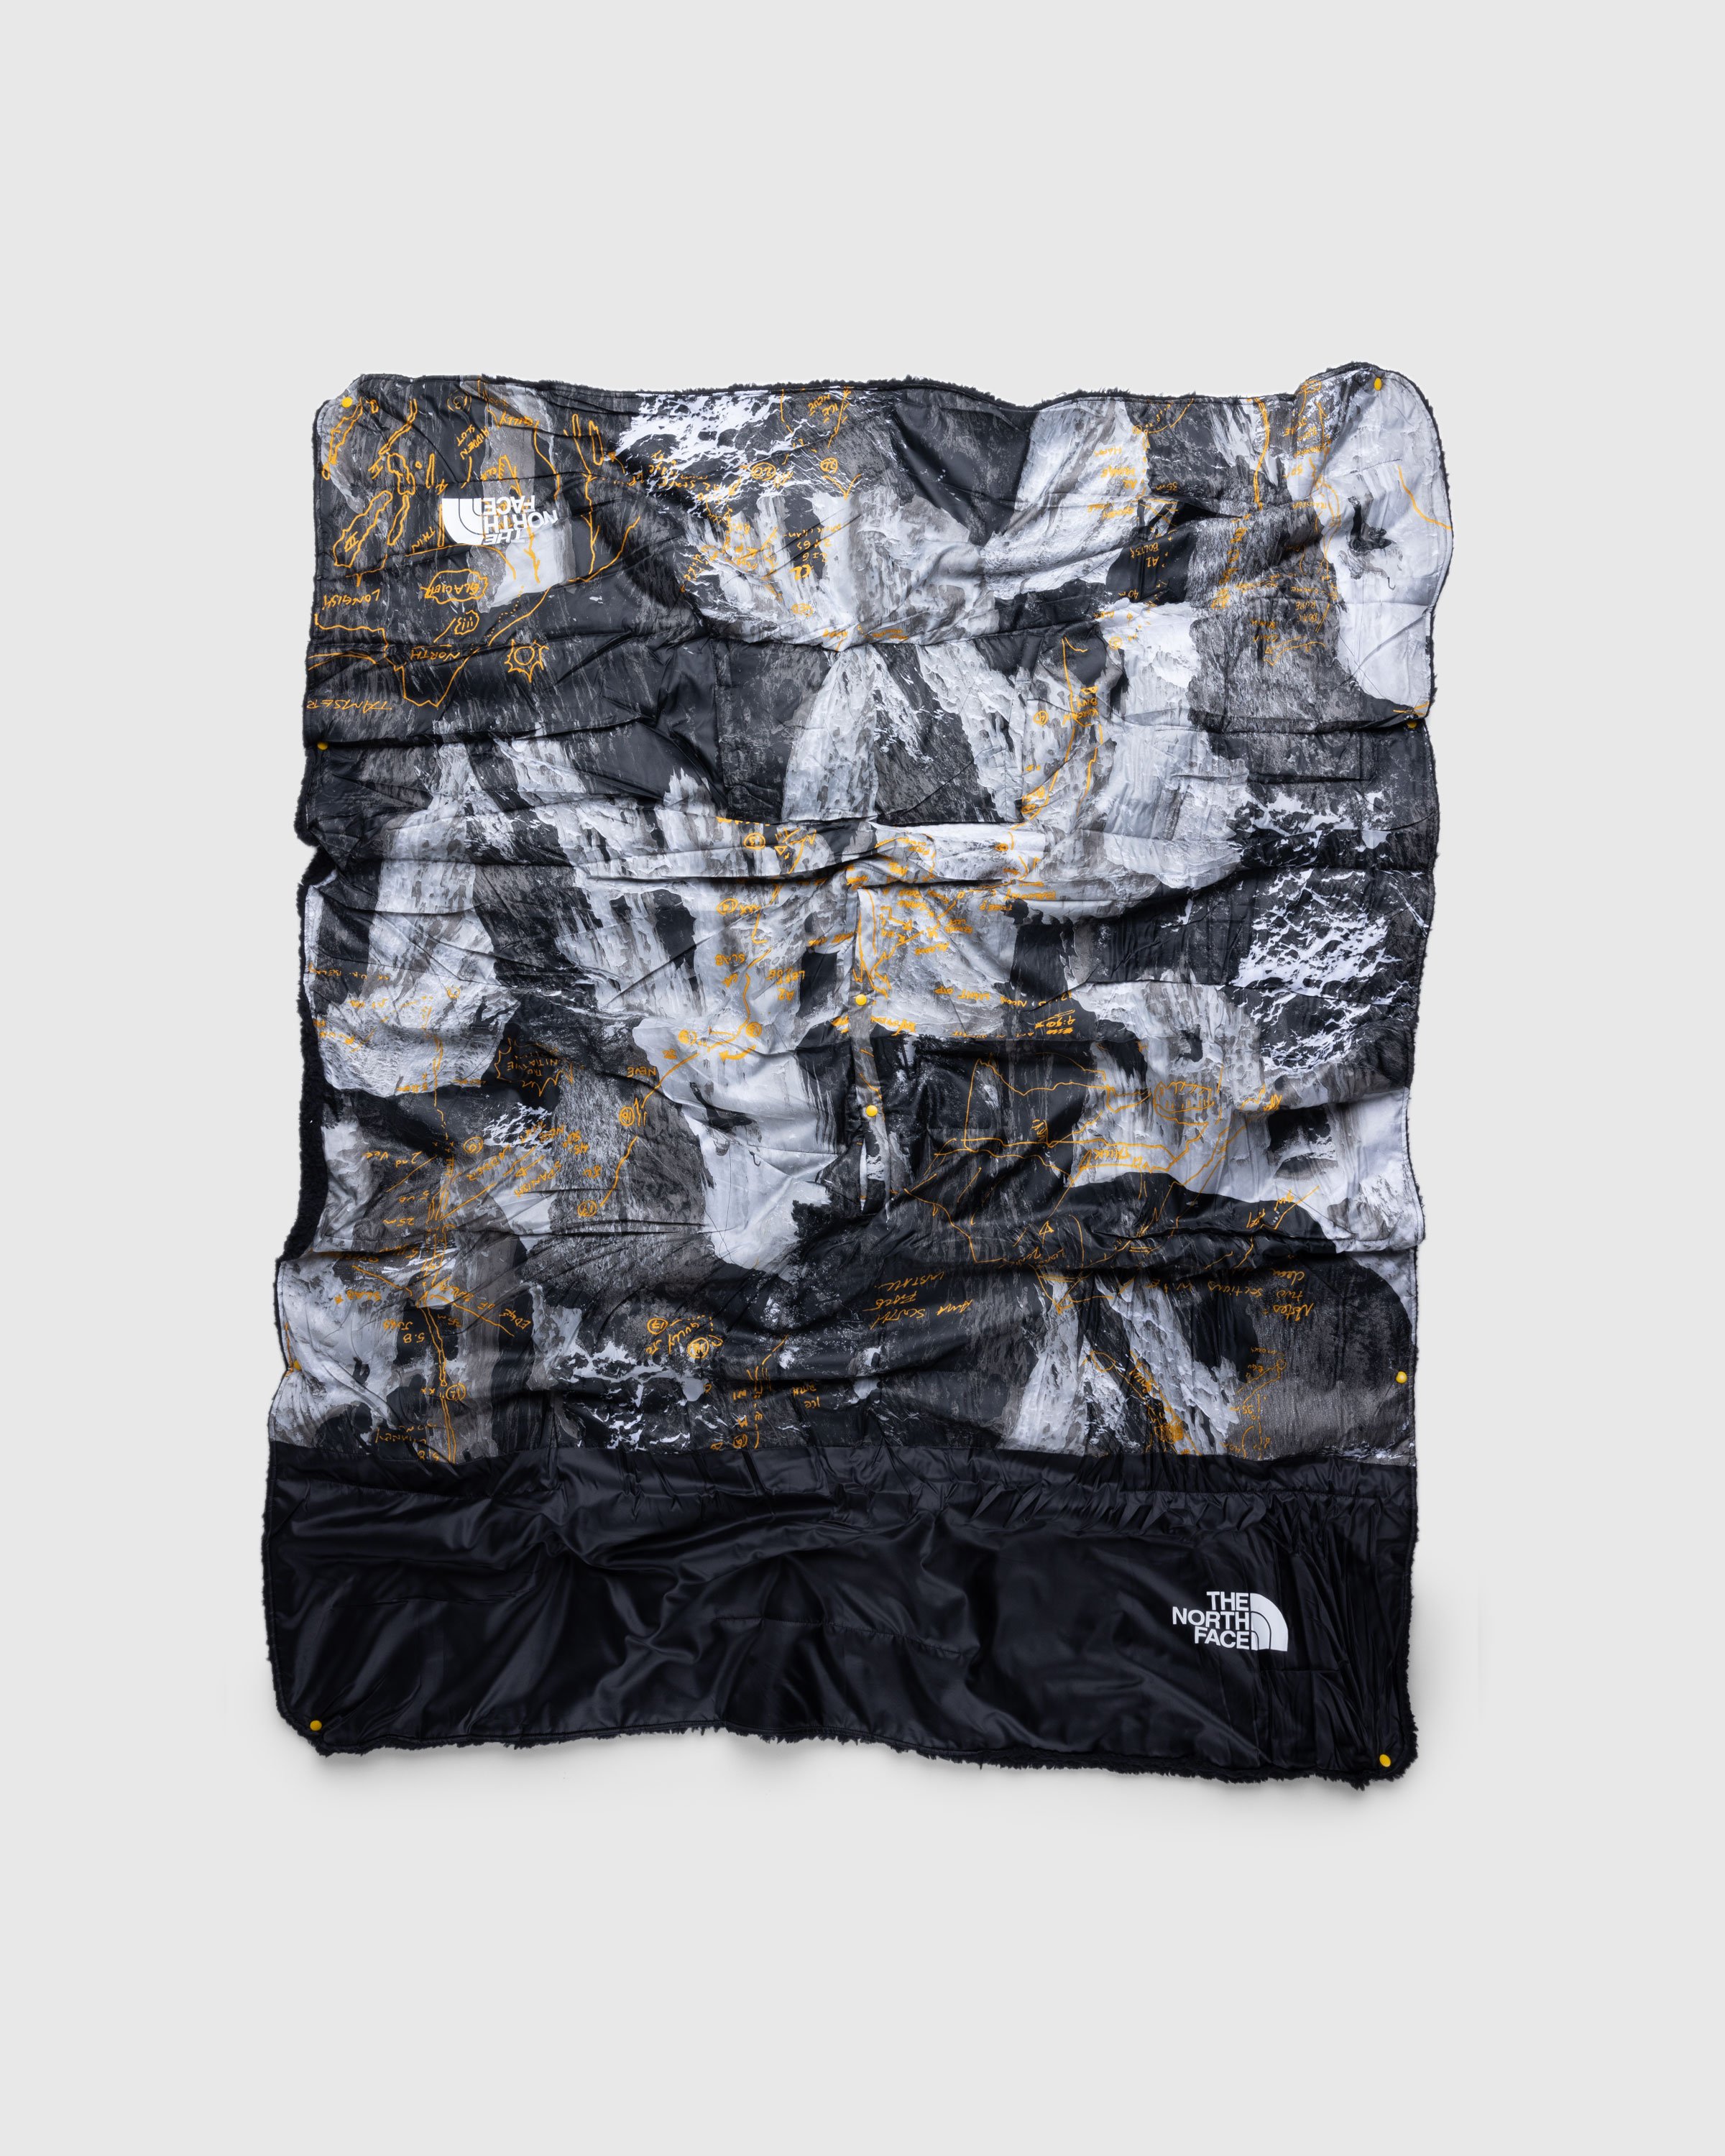 The North Face - Wawona Fuzzy Blanket Falcon Brown Conrads Notes Print - Lifestyle - Multi - Image 1